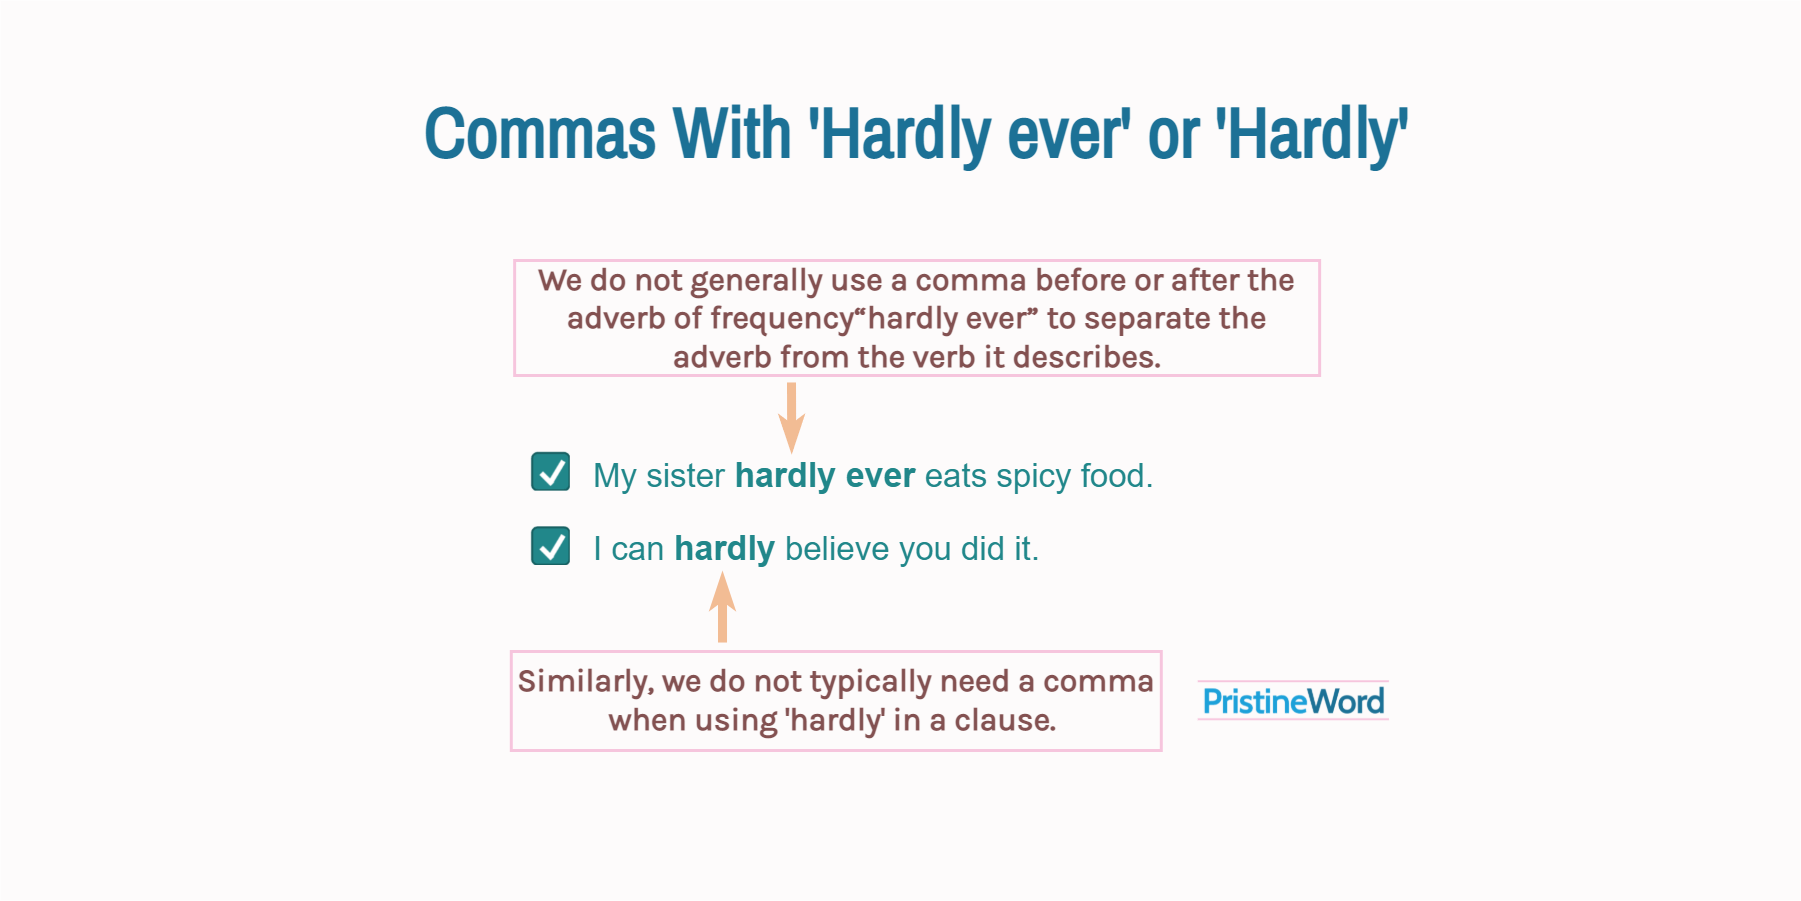 Do You Need a Comma With 'HARDLY' or 'HARDLY EVER'?